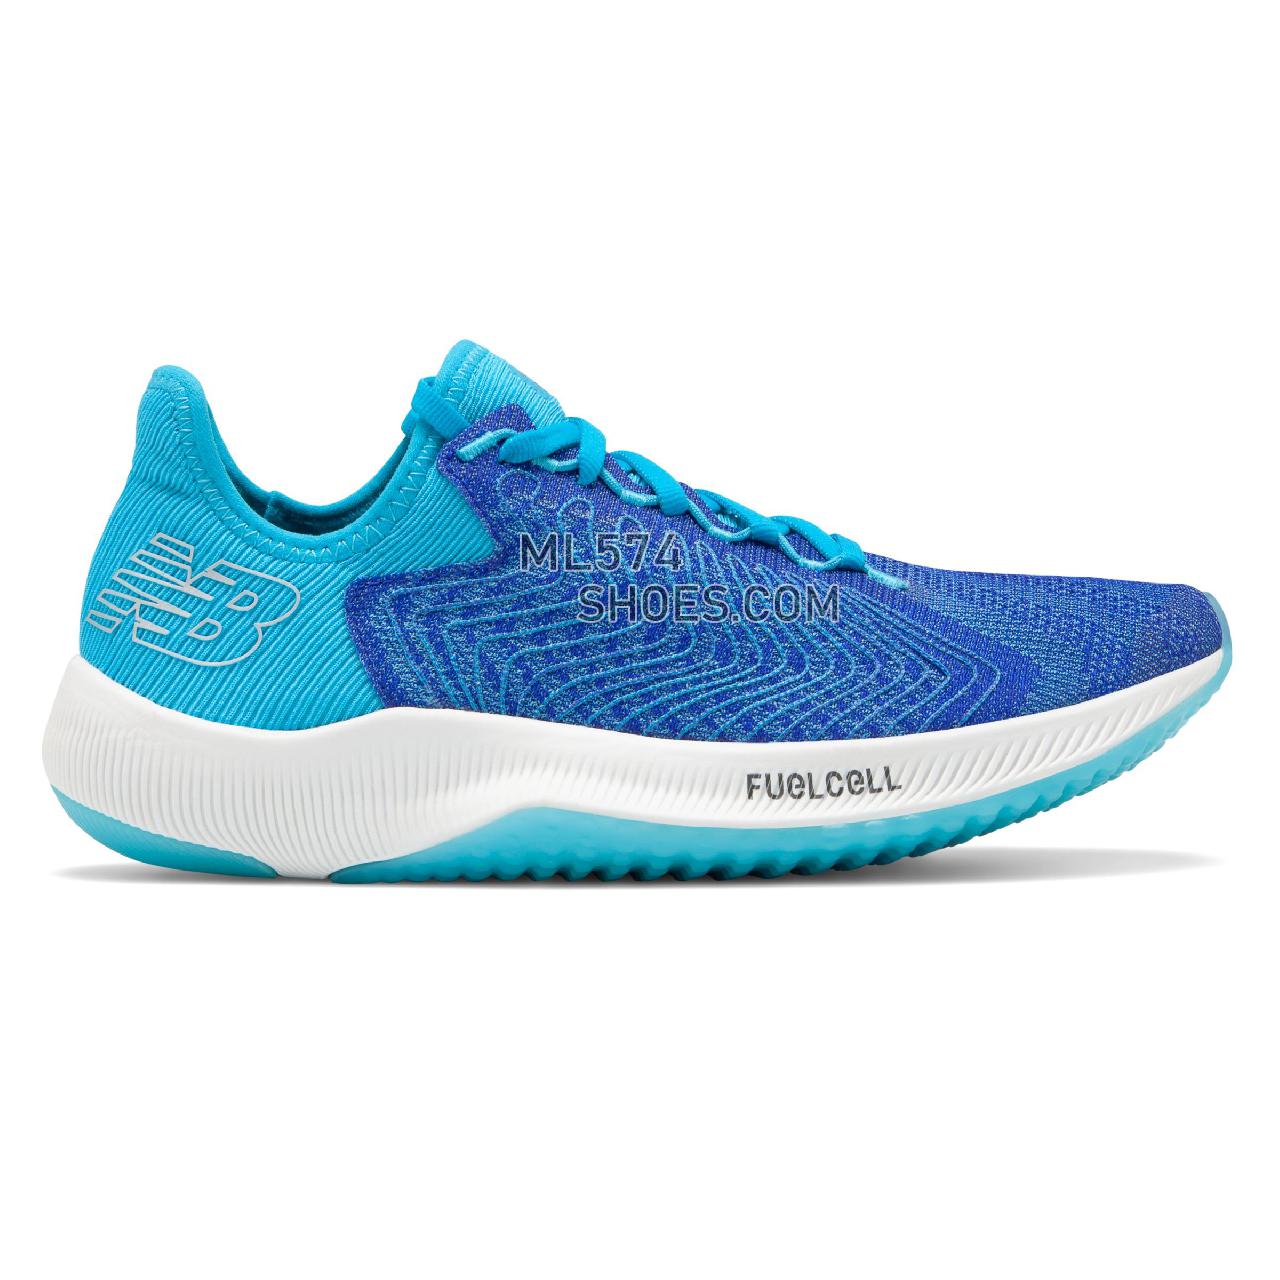 New Balance FuelCell Rebel - Women's Neutral Running - UV Blue with Bayside - WFCXBB